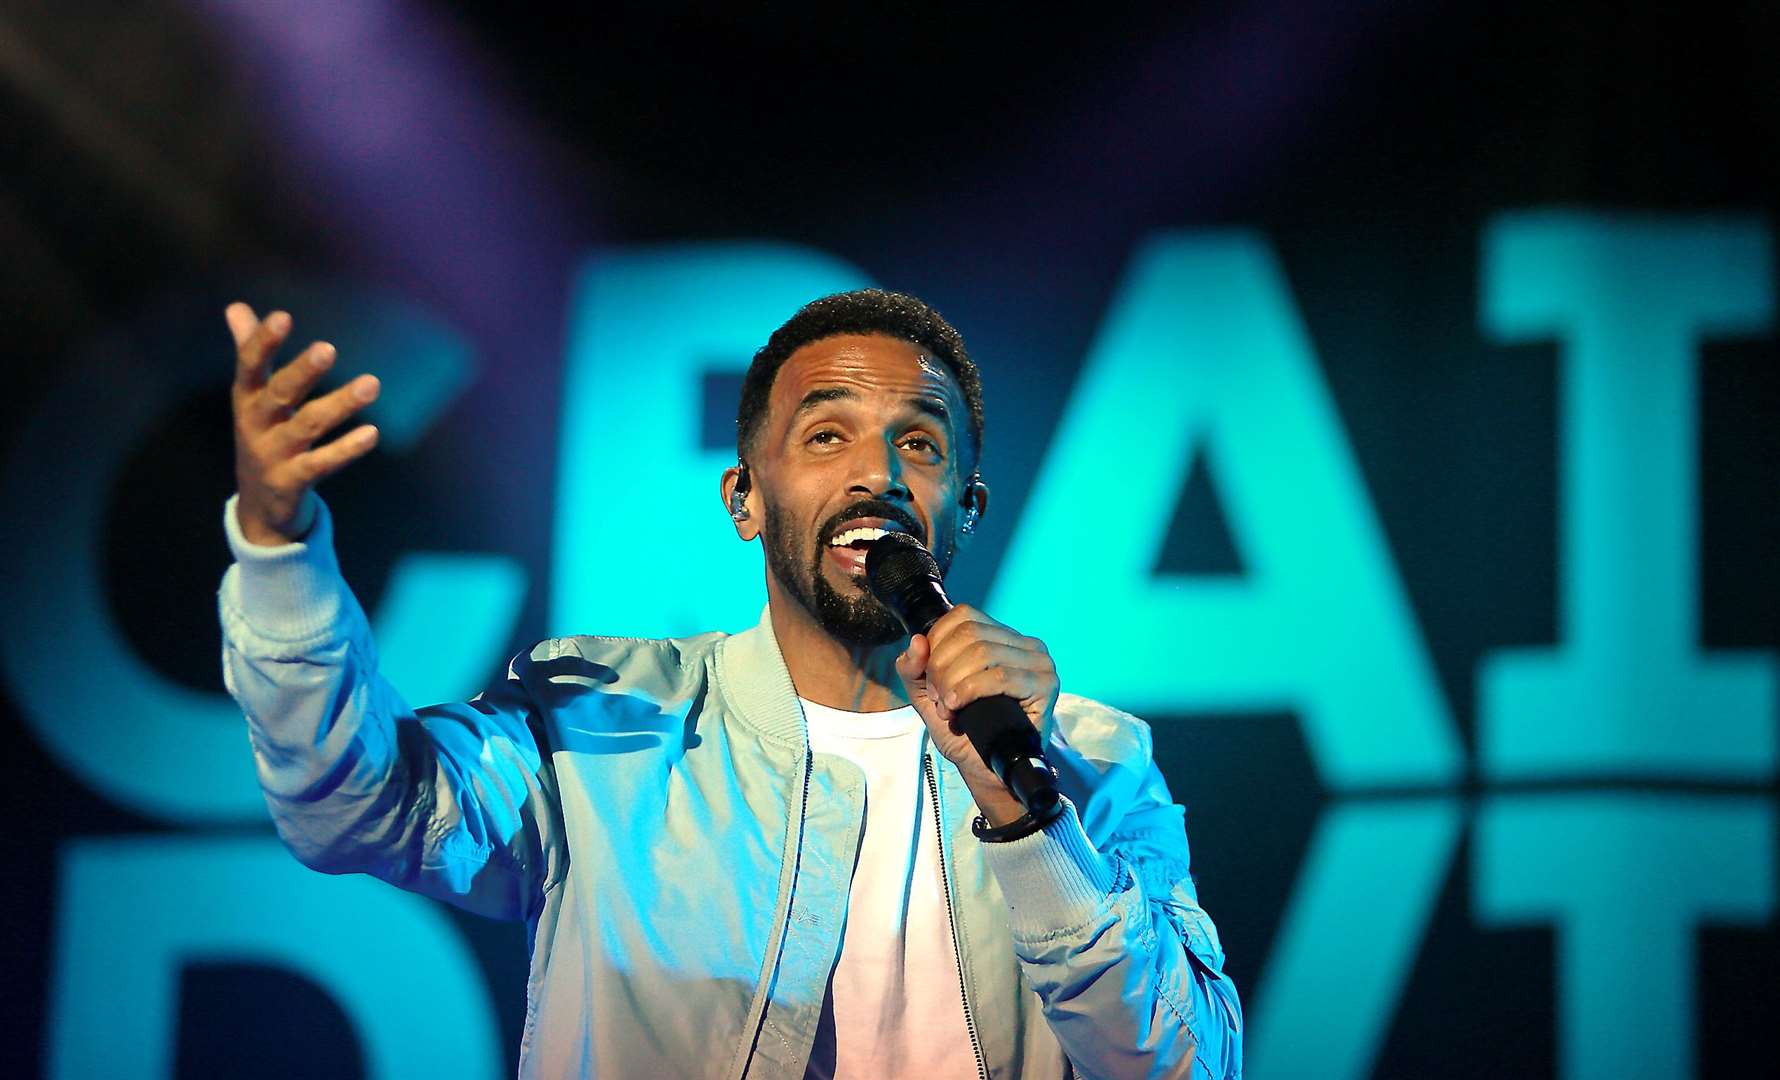 Craig David was a hit with the audience